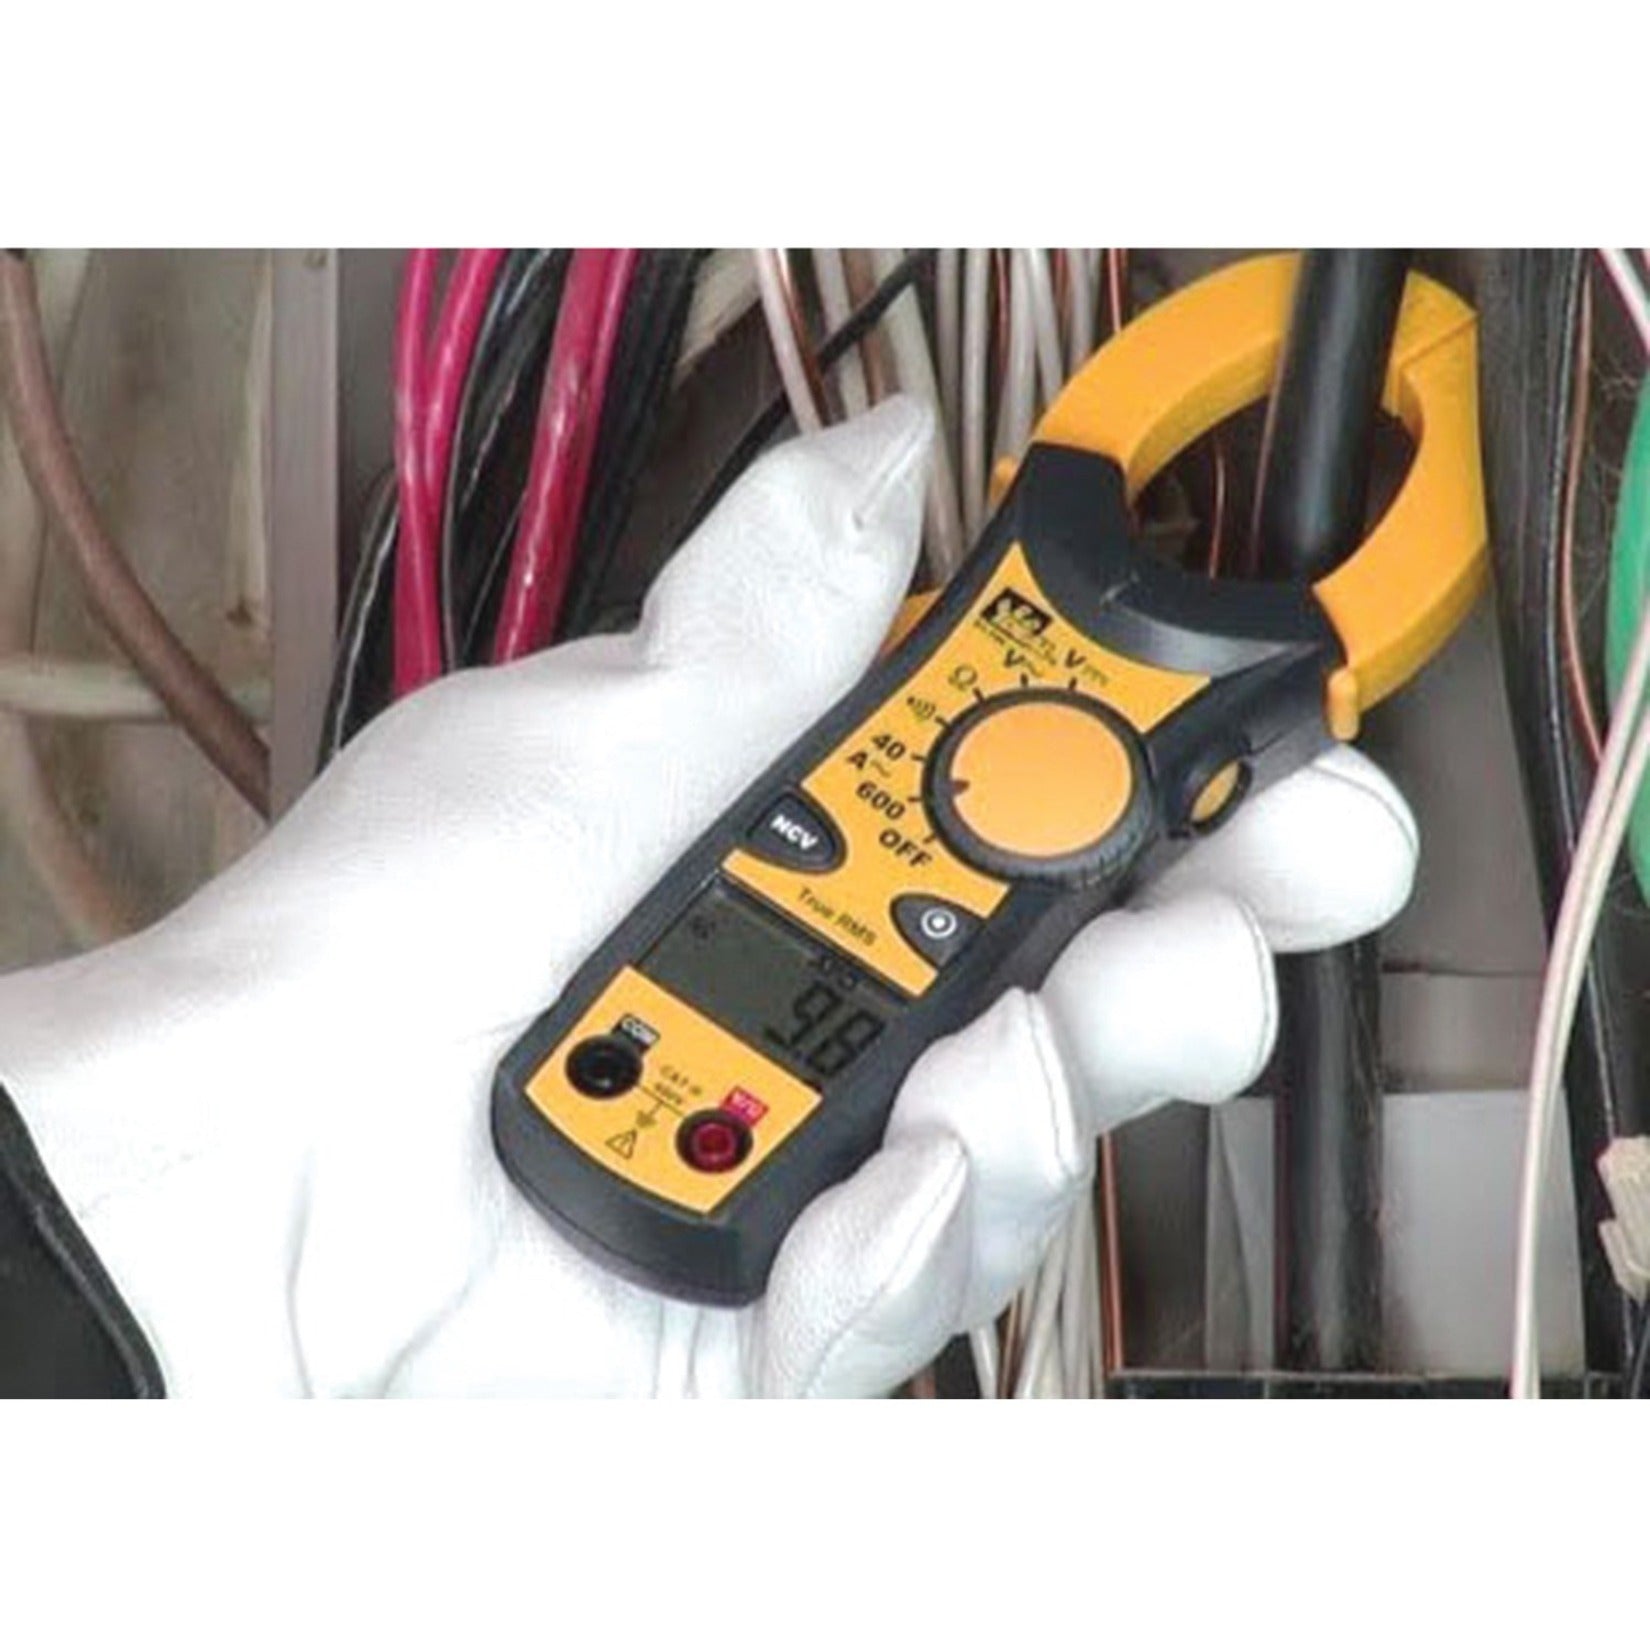 IDEAL Clamp-Pro Clamp Meters 600 Amp [Discontinued]